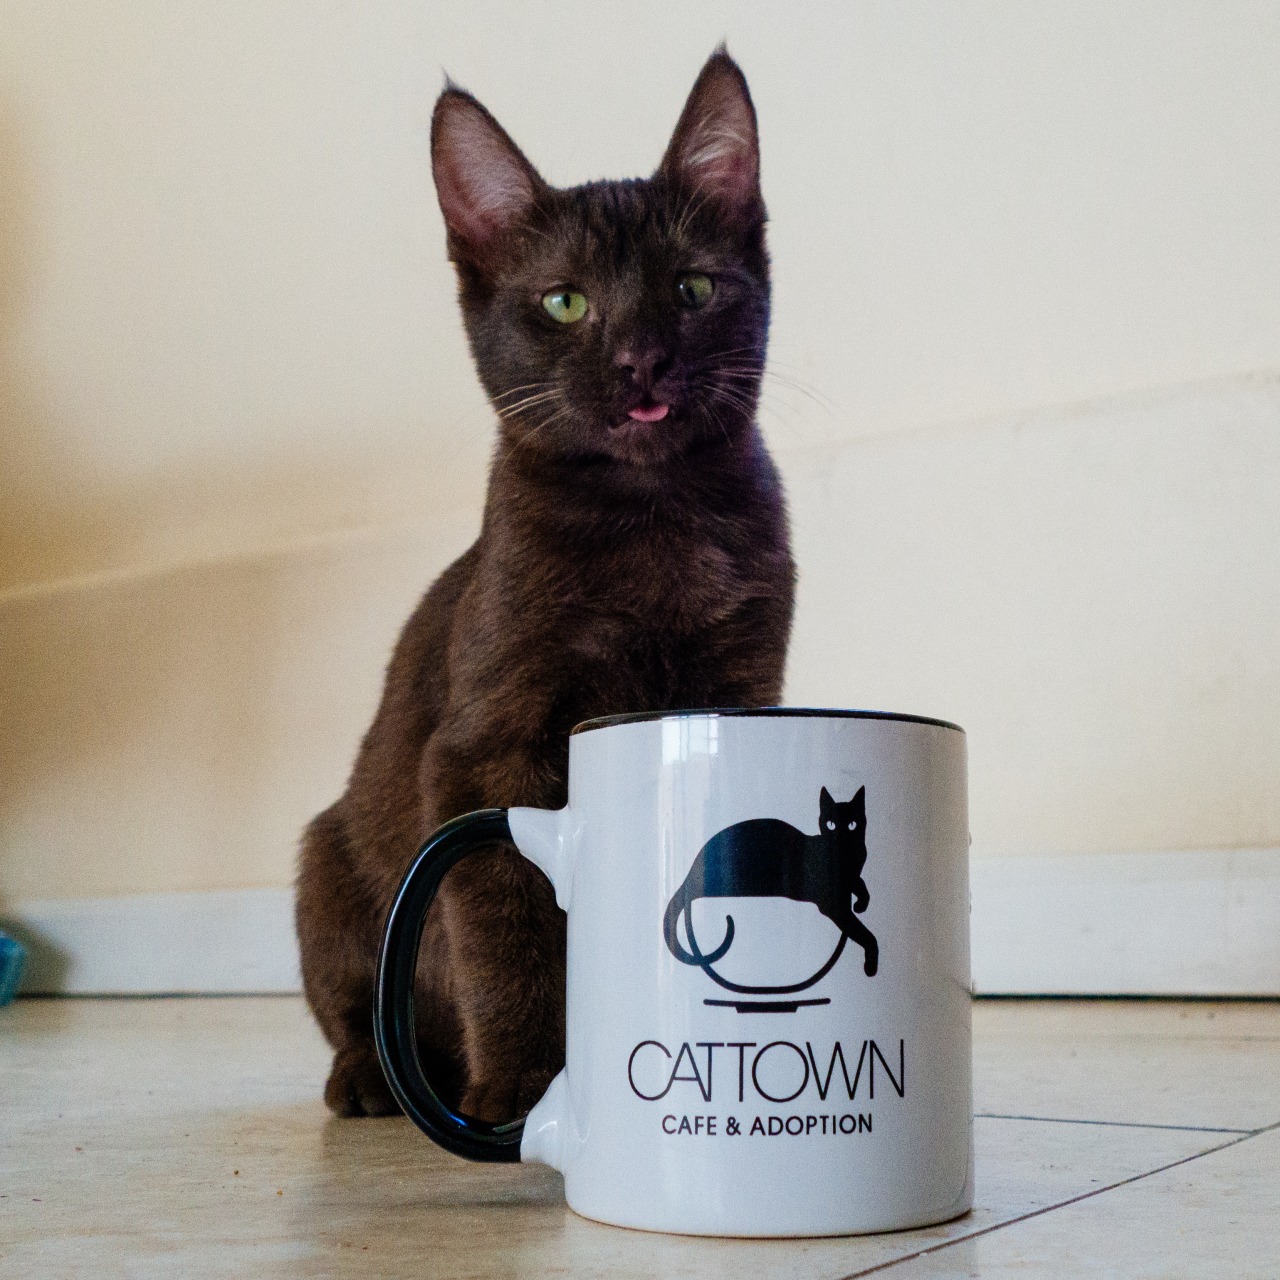 We&rsquo;re excited to announce that on October 25th, 2014, we&rsquo;ll be opening the doors to the Cat Town Cafe at 2869 Broadway in Oakland, CA! This will be the first cat cafe in the United States (inspired by the cafes made popular in Japan), and will enable us to empty many more cat cages from our local municipal shelter. The Cat Town Cafe will feature an area called the Cat Zone, where our cats will be free roaming and available for adoption. Visitors can spend up to an hour in the Cat Zone, and walk-ins are welcome as space allows. For a $10 donation, you can make a Cat Zone Reservation ahead of time, which ensures your visiting time is available, and supports a great cause. The cafe hours will be 8AM - 7PM Wednesday - Sunday, and the Cat Zone will be open from 10AM - 7PM. We can&rsquo;t wait to start getting more cats out of the shelter and into great homes, see you in October! &gt;^. .^&lt; Ann, Adam, and all of us at Cat Town